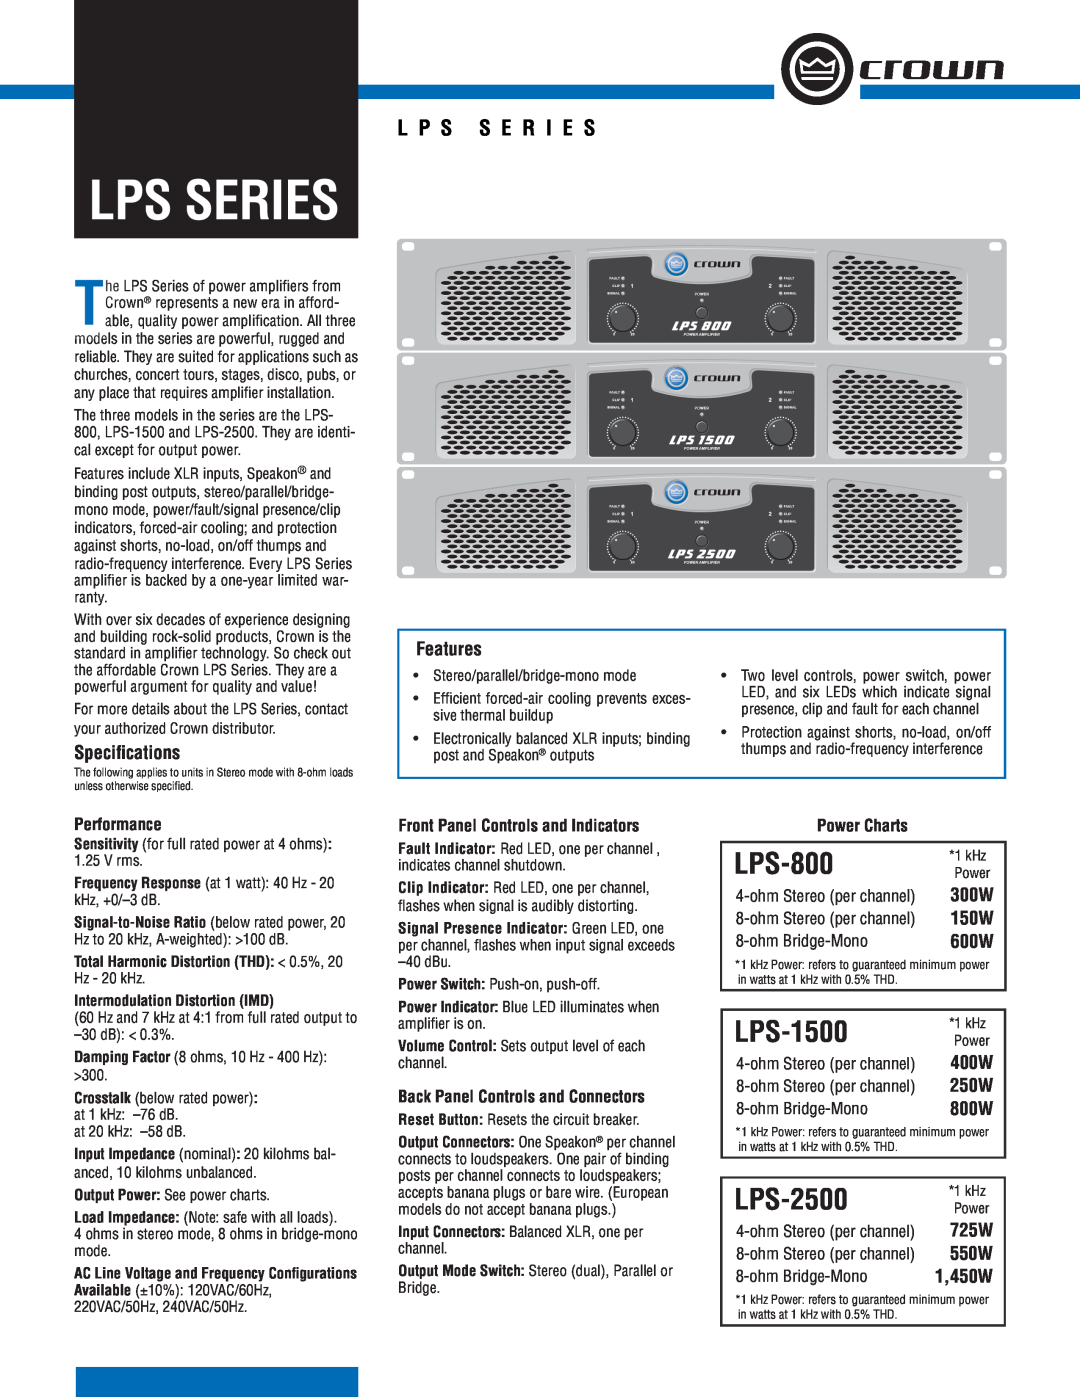 Crown LPS-2500 specifications Lps Series, Speciﬁcations, Features, 725W, 550W, Performance, Power Charts, LPS-800, 300W 